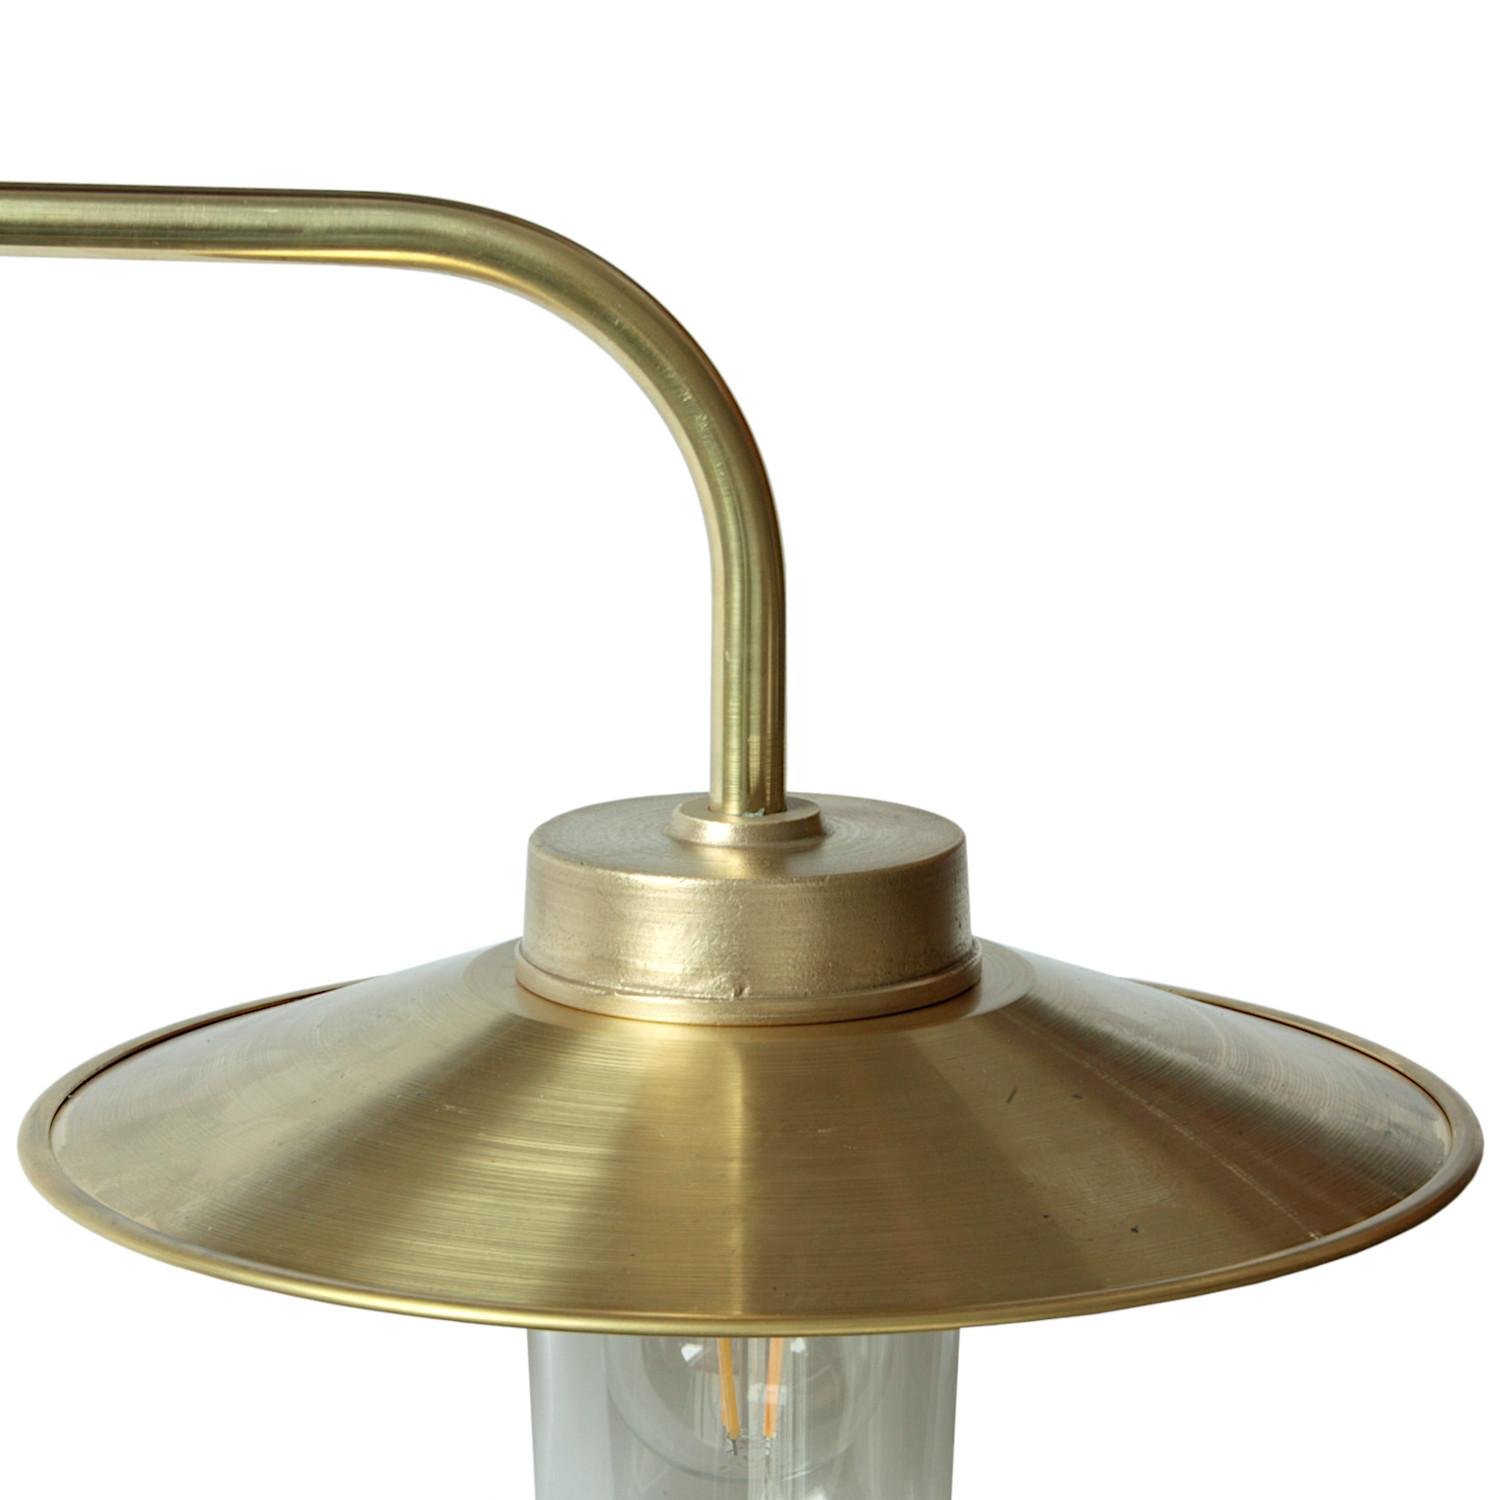 Classical Barn Lamp in Brass 38-90 BR L/XL: Messing roh